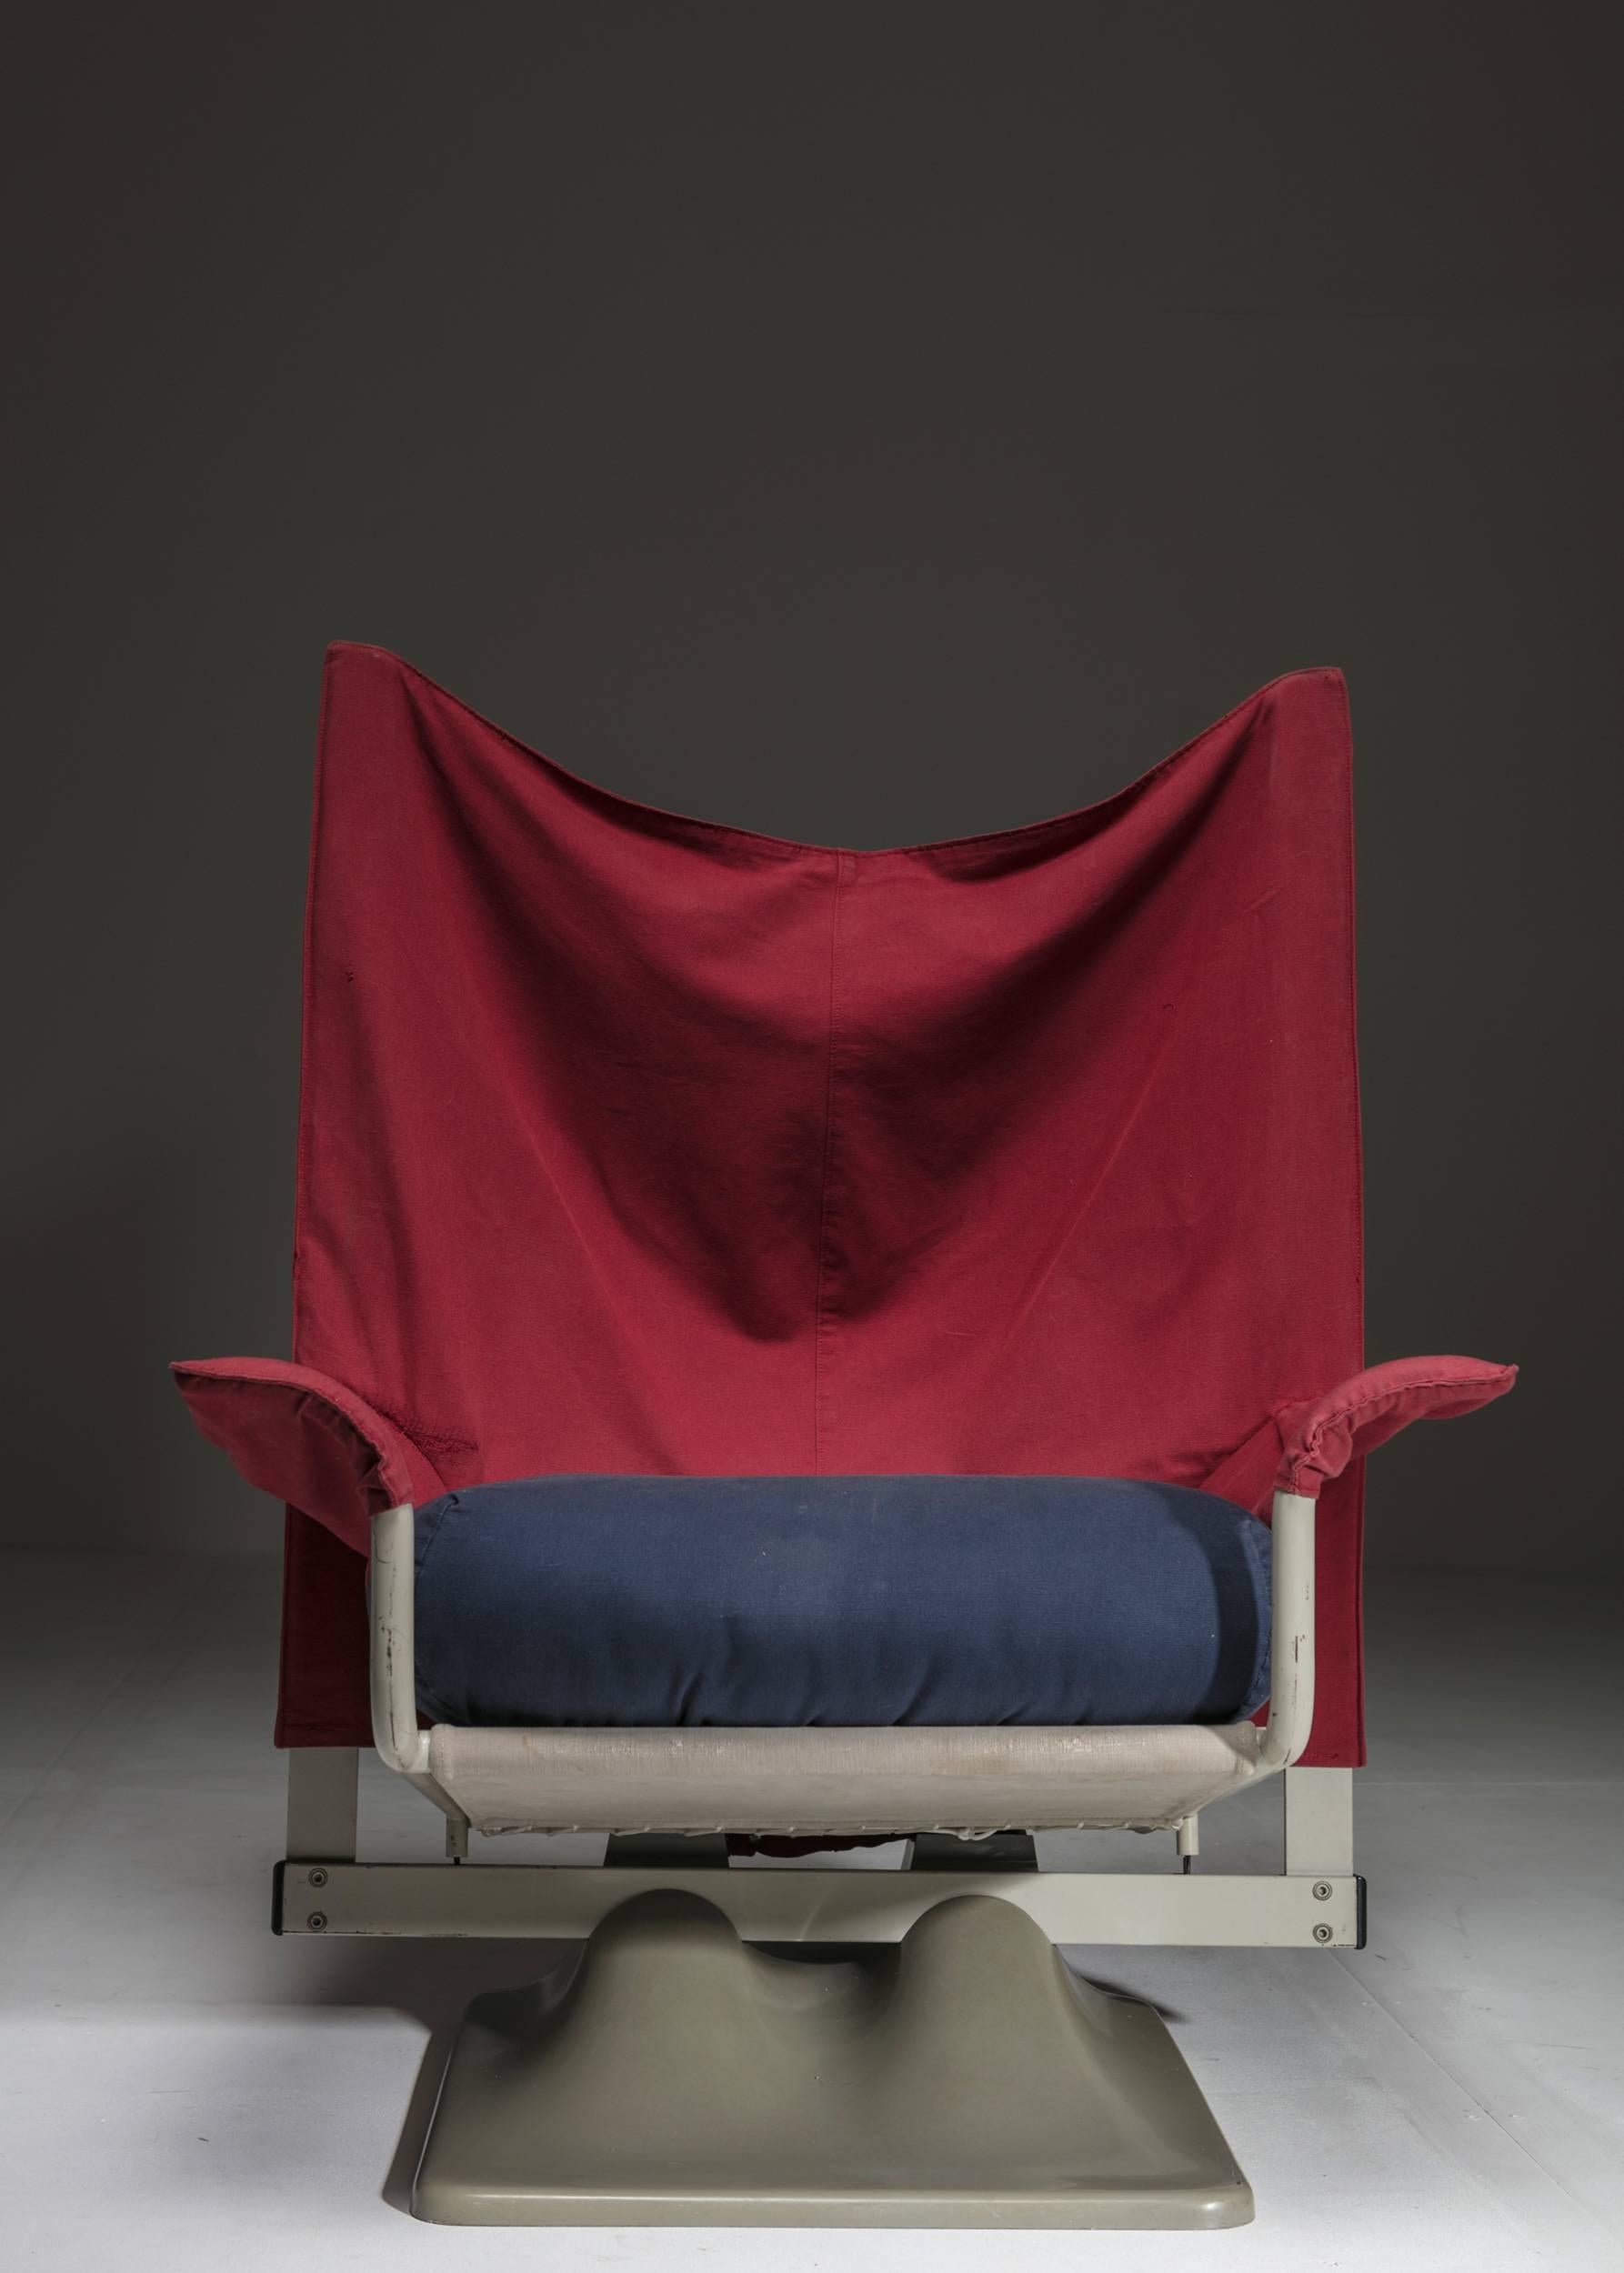 AEO lounge chair by Archizoom Associati for Cassina.
Plastic organic-shaped base, violet pillow, red backseat and lacquered metal frame for this extremely comfortable seat.